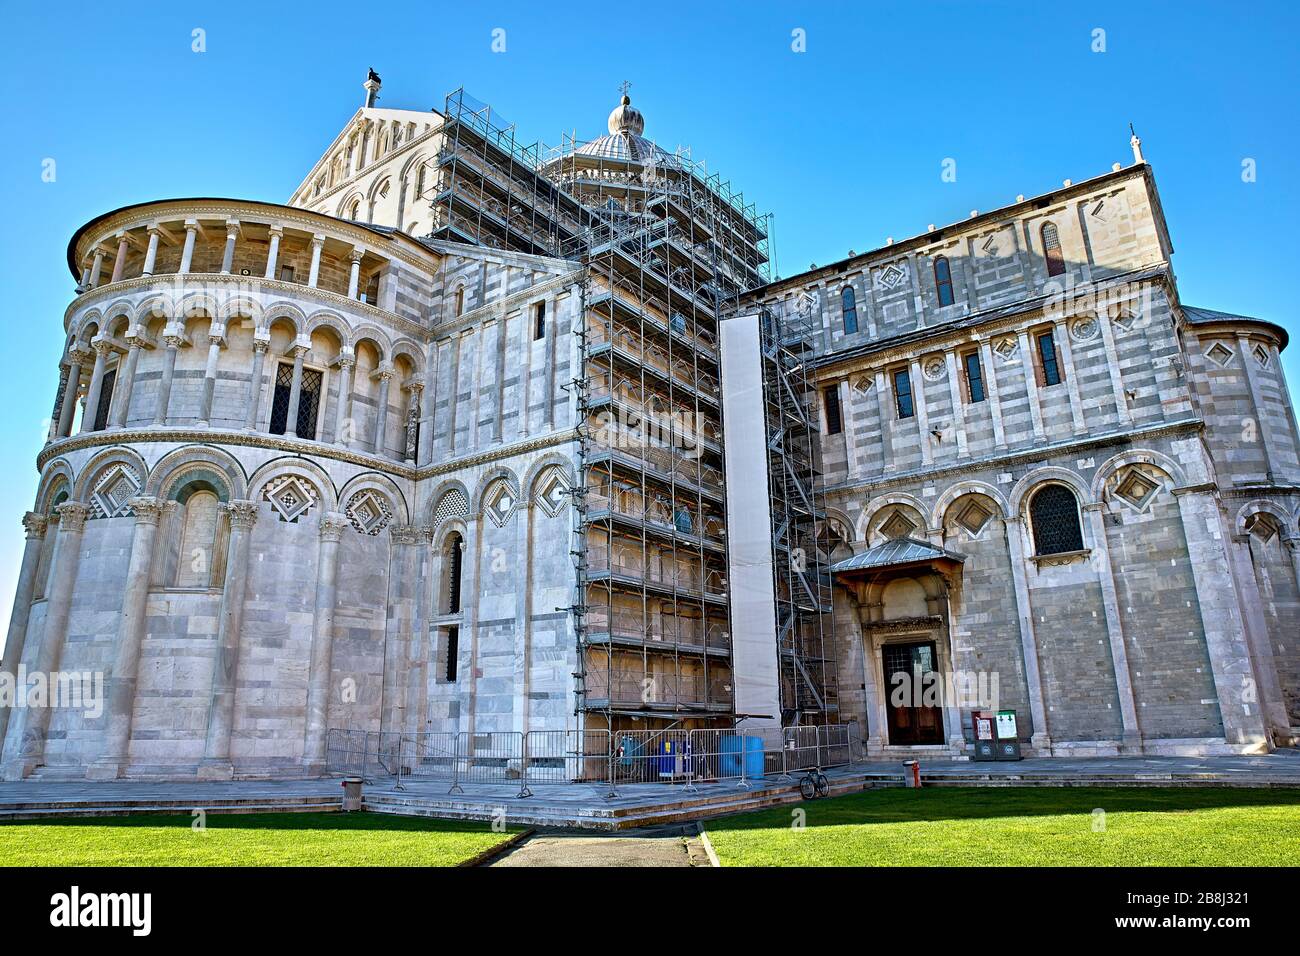 The Piazza dei Miracoli (Square of Miracles), formally known as Piazza del Duomo (Cathedral Square), is a walled 8.87-hectare area located in Pisa, Tu Stock Photo